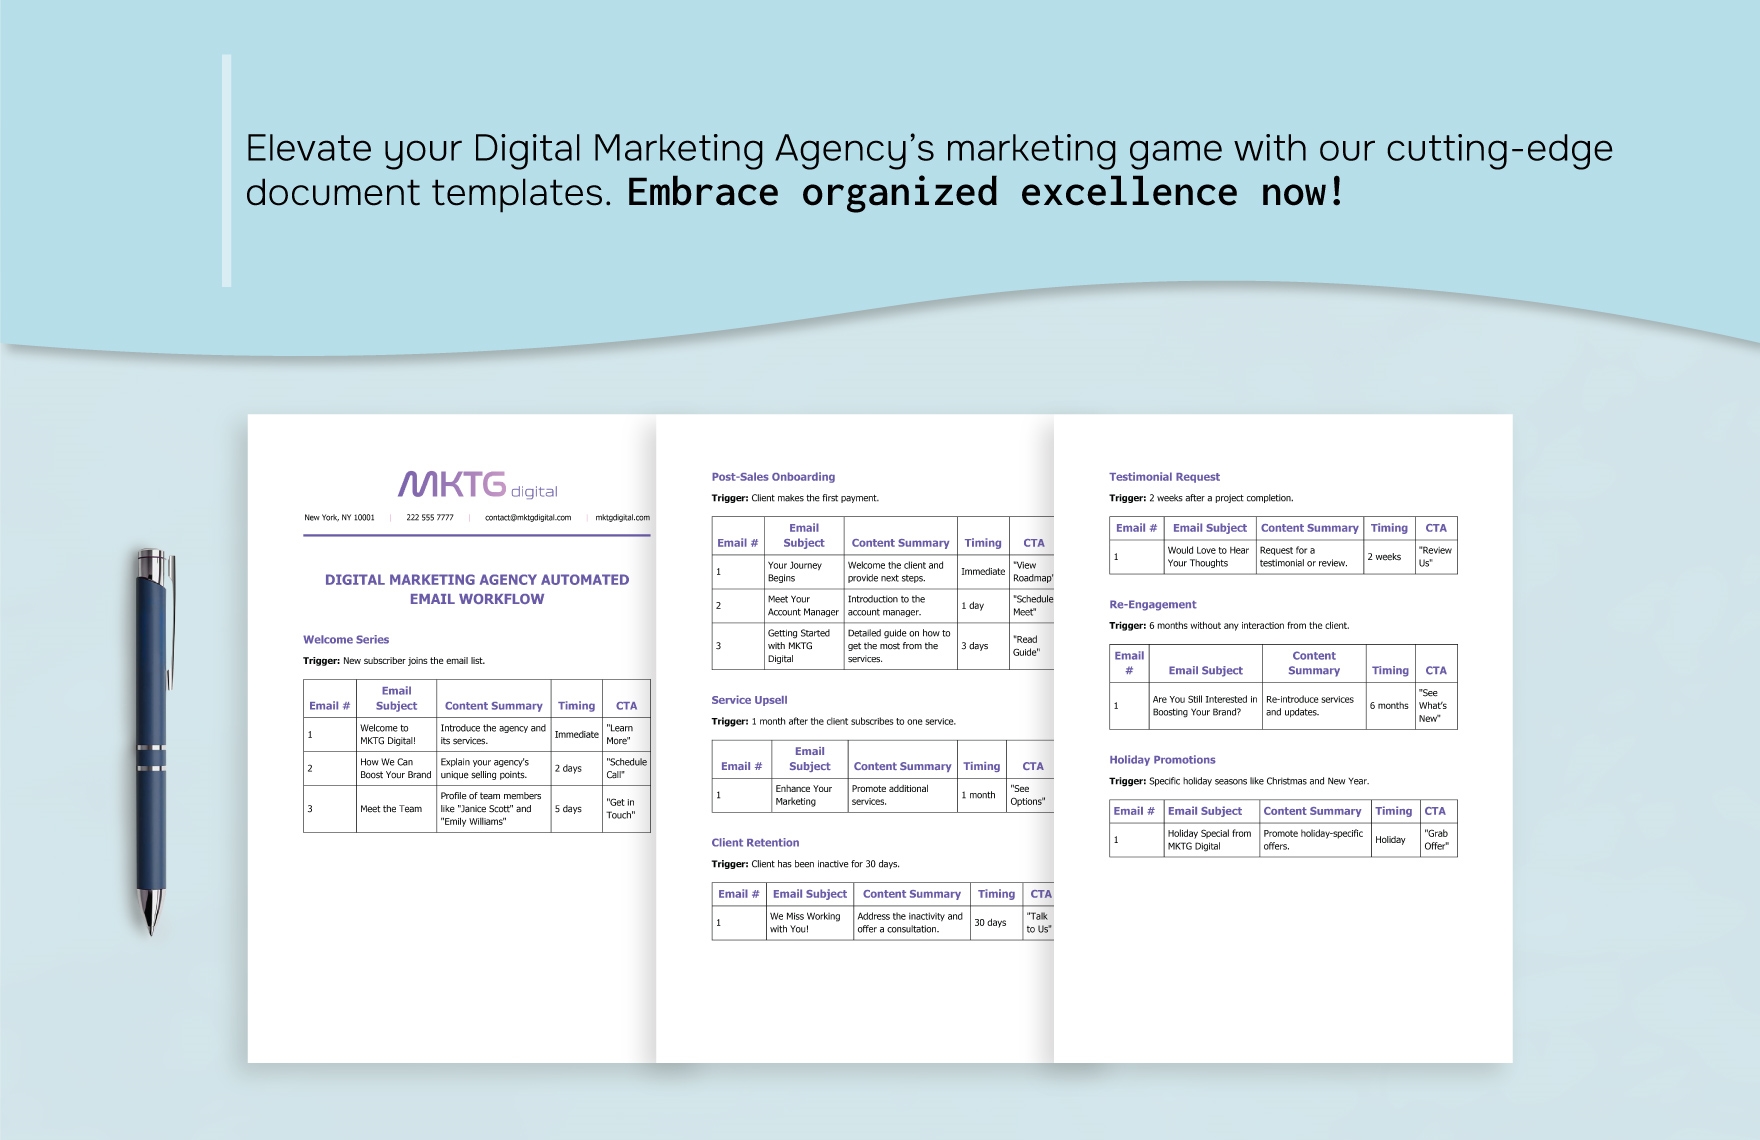 Digital Marketing Agency Automated Email Workflow Template